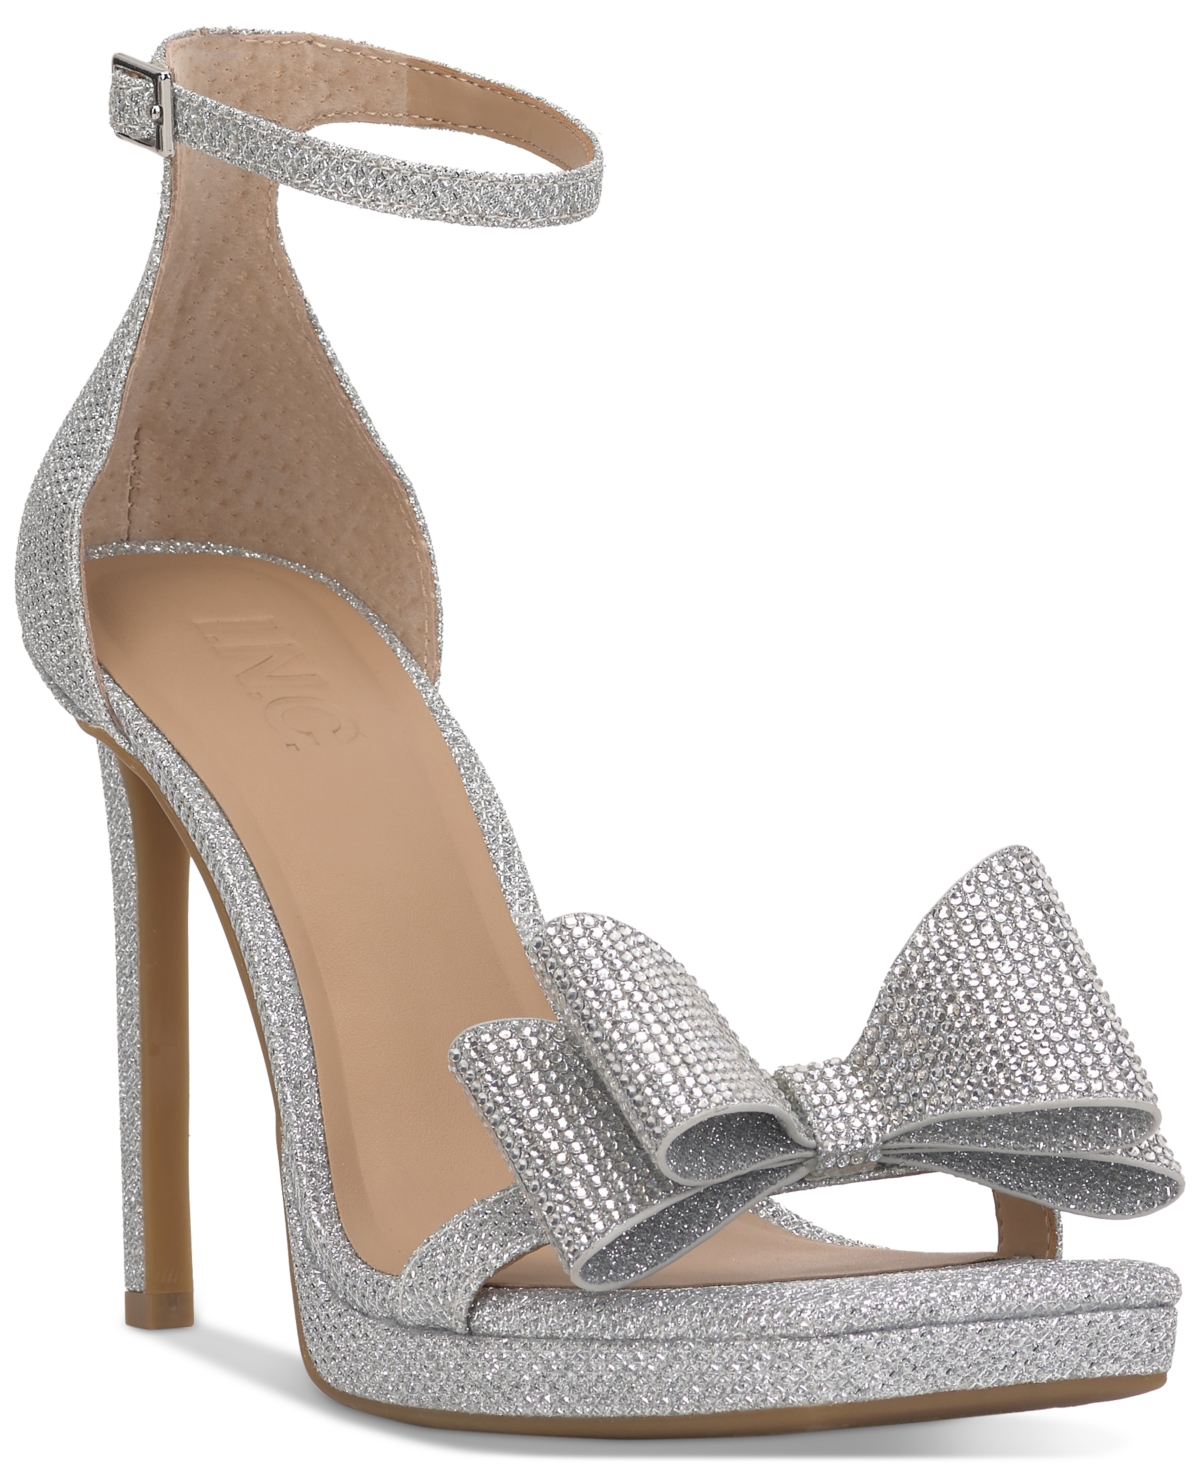 Women's Ajira Bow Evening Sandals, Created for Macy's - Silver Glitter